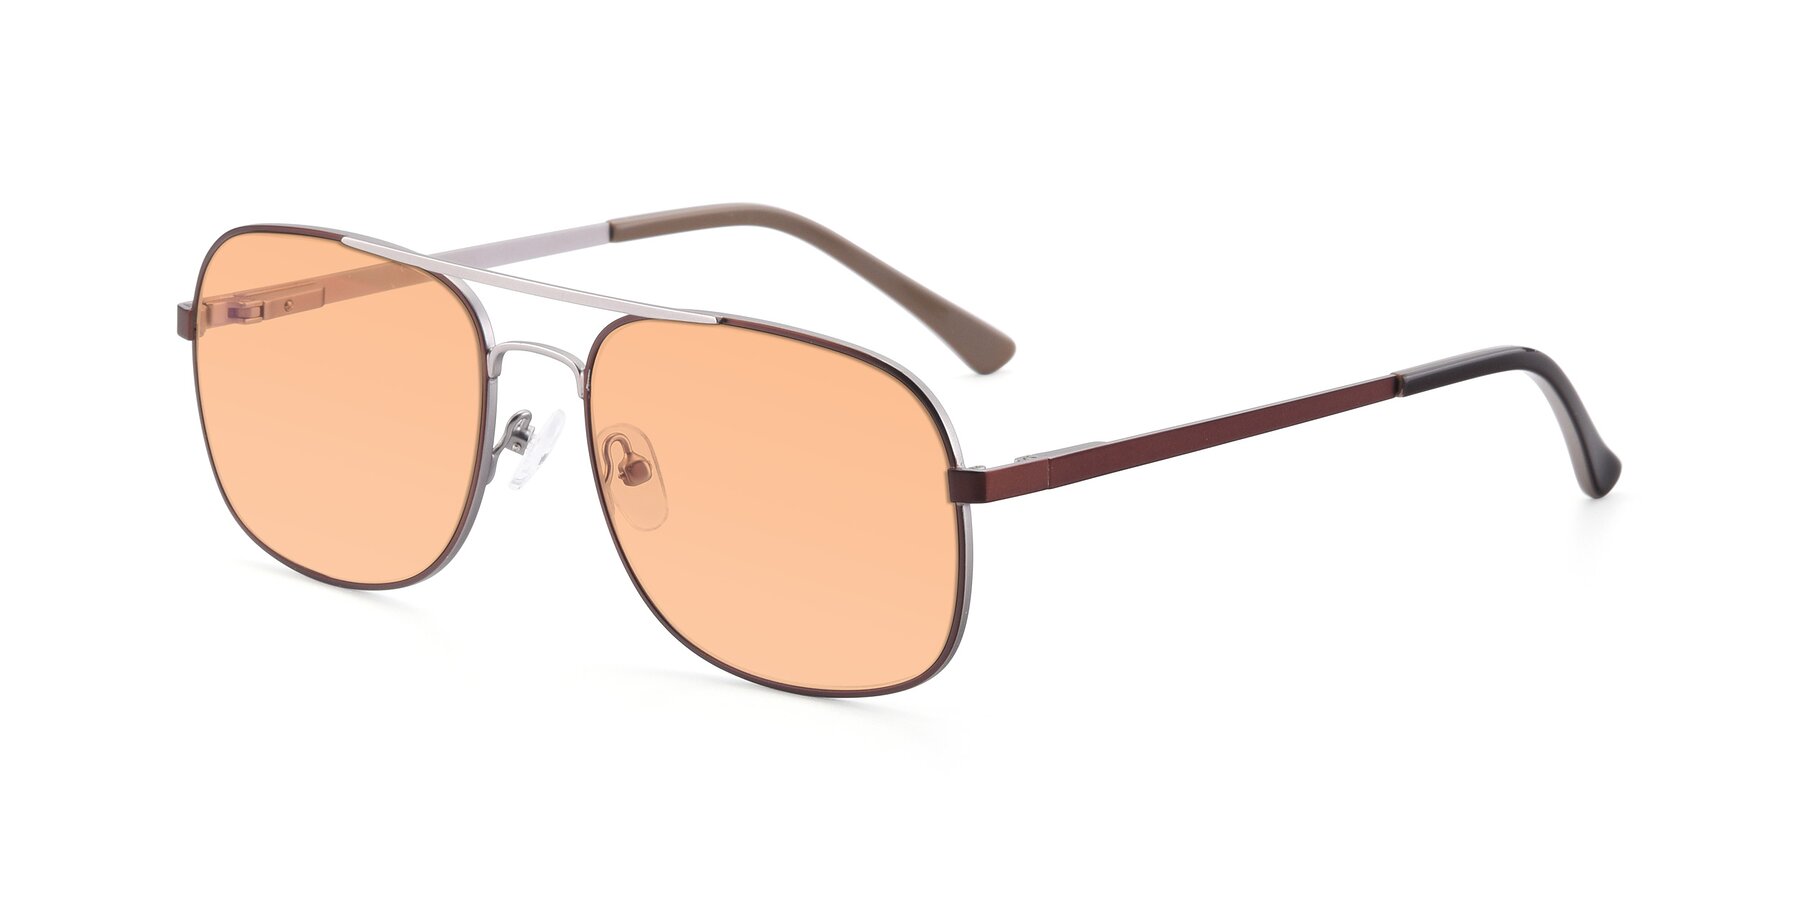 Angle of 9487 in Brown-Silver with Light Orange Tinted Lenses